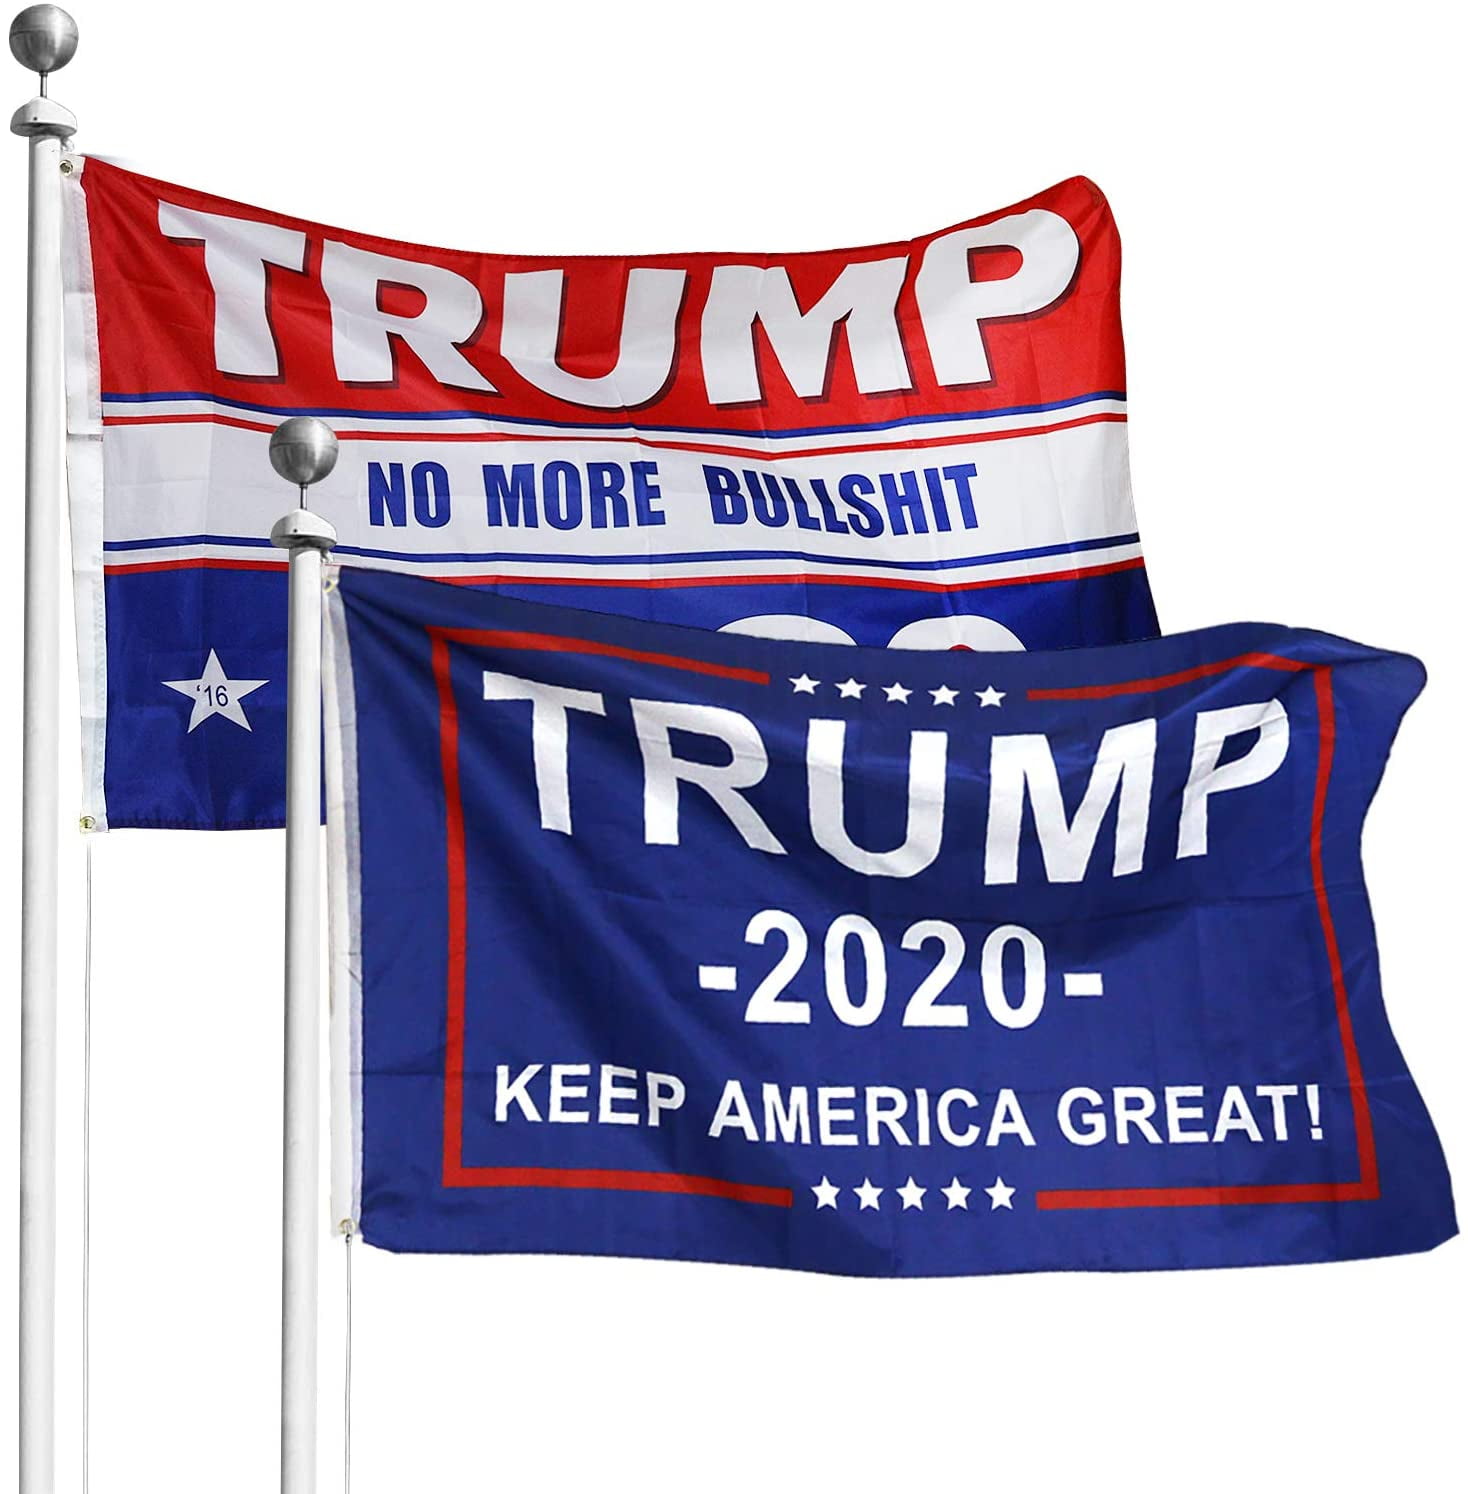 TENNESSEE FOR TRUMP 2020 Advertising Vinyl Banner Flag Sign Many Sizes USA MAGA 